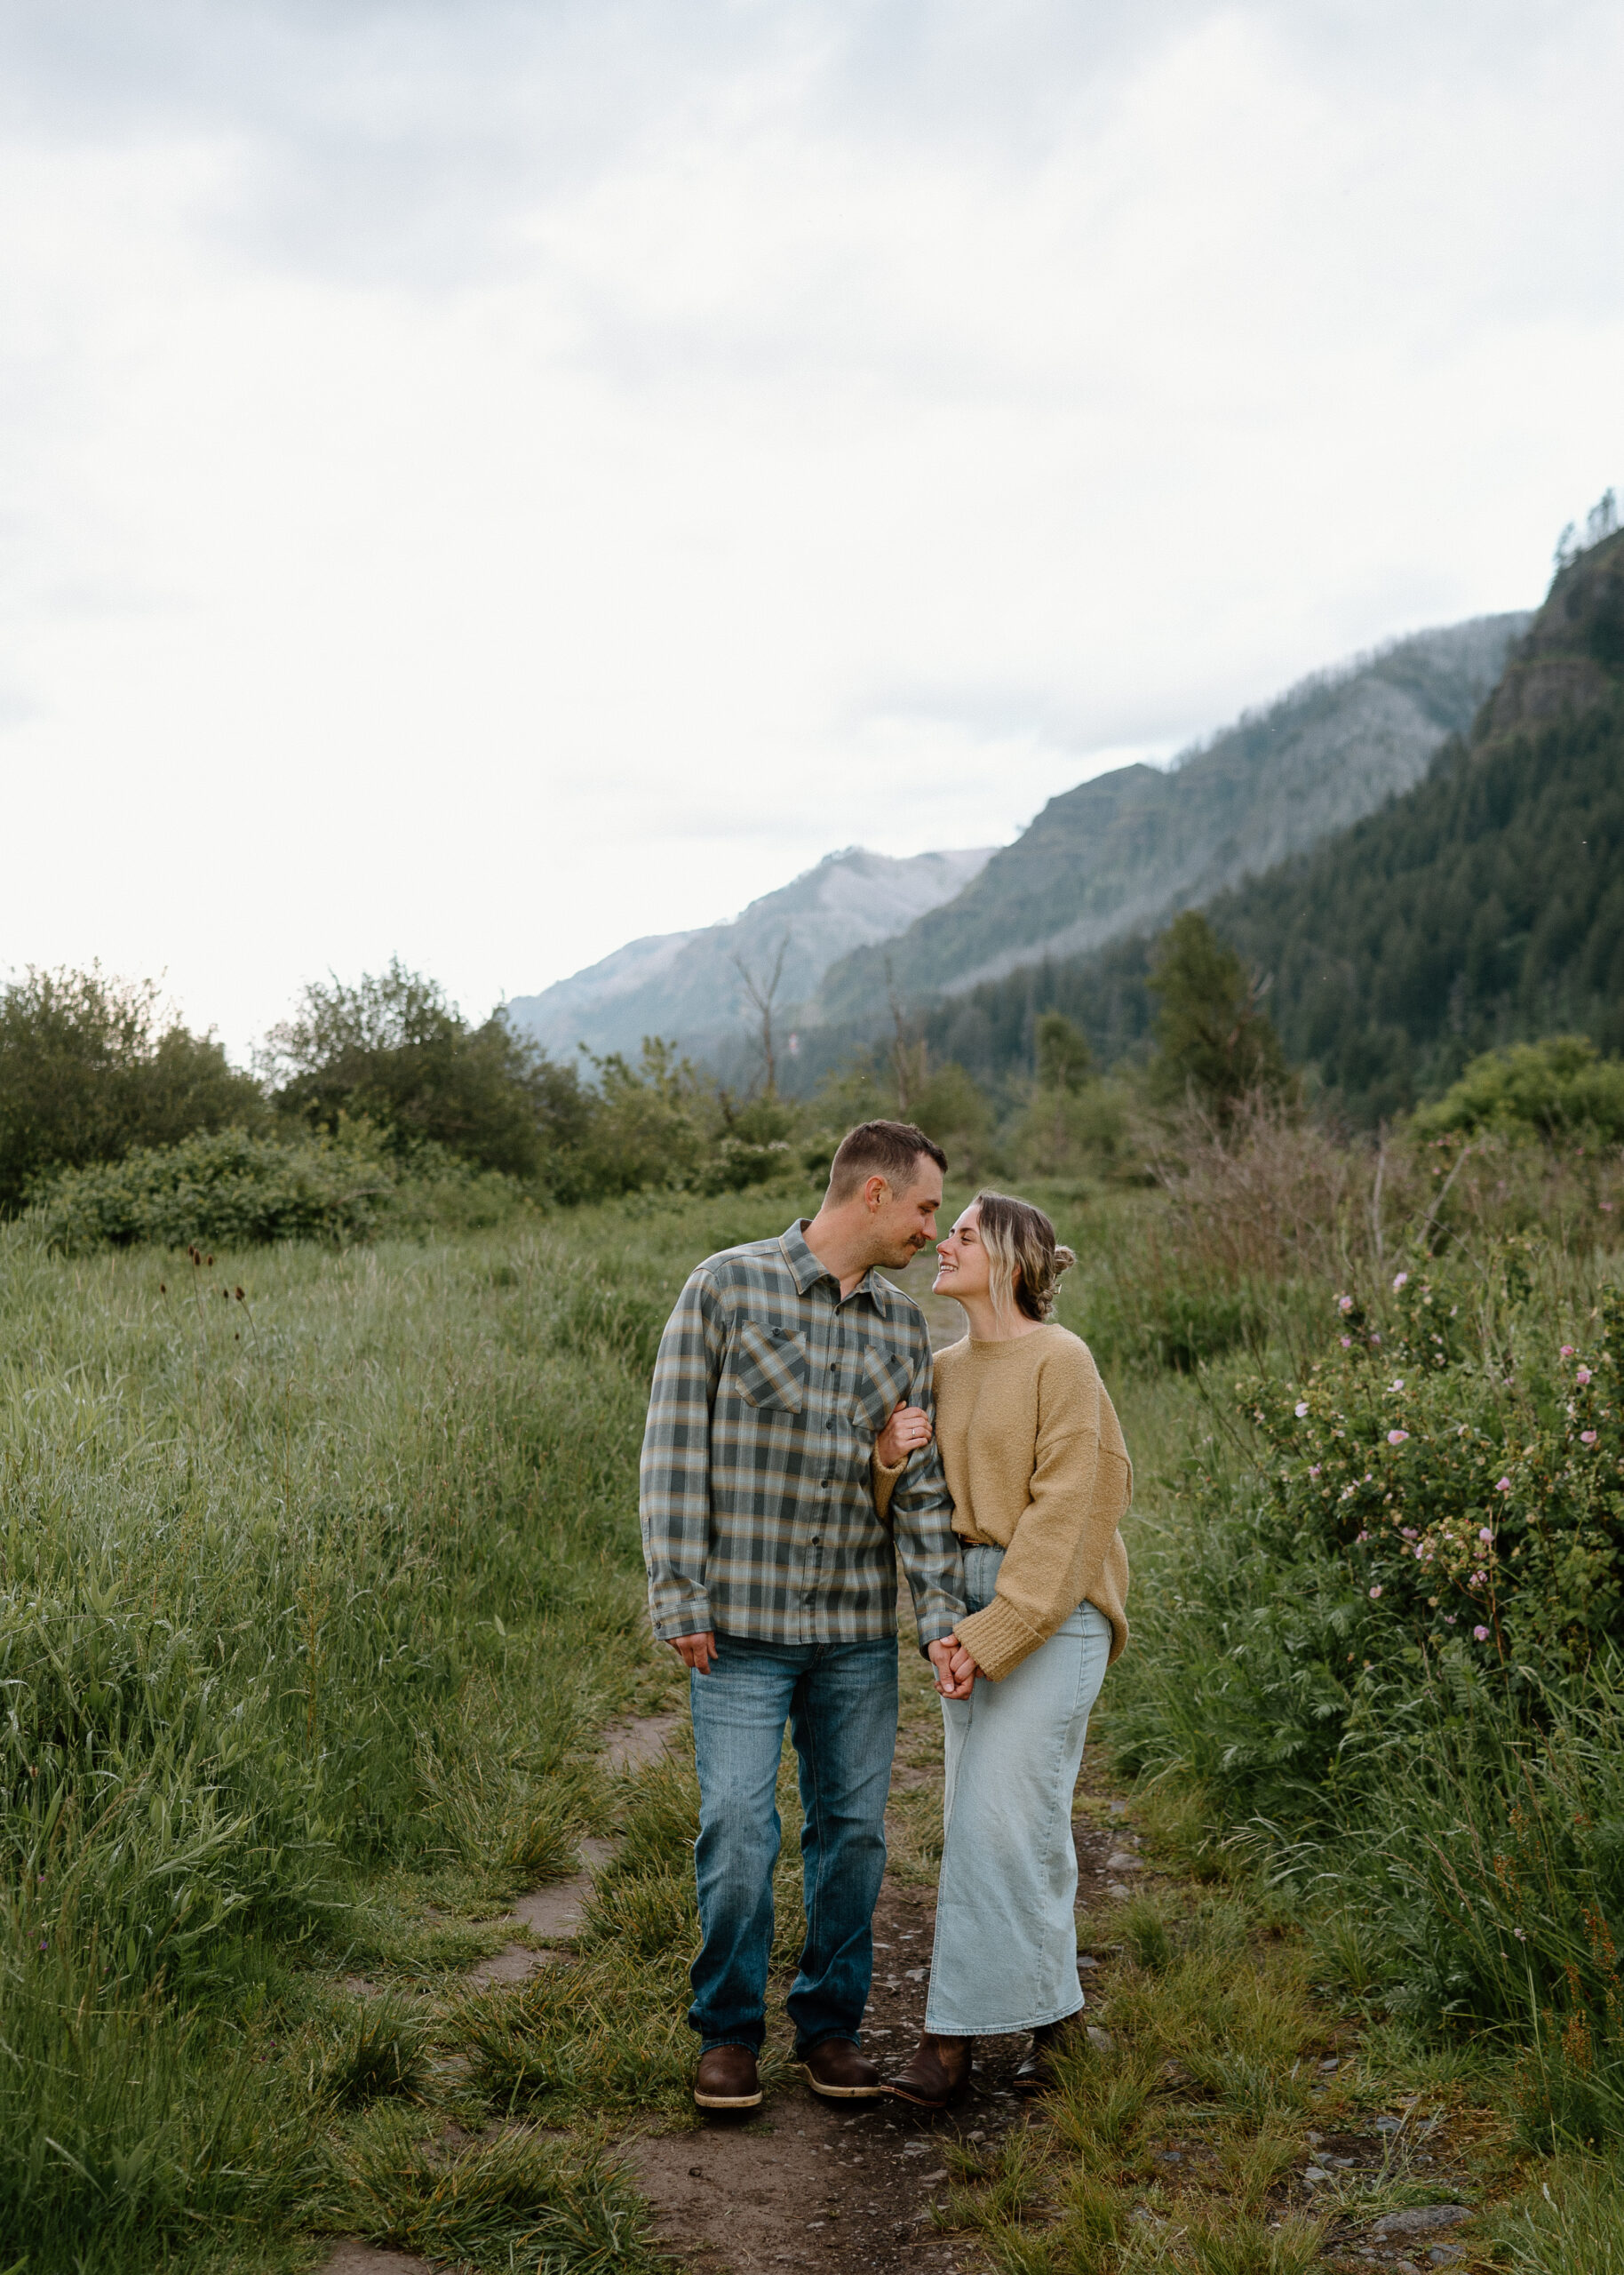 ancouver Wa Engagement Photos, Columbia River Gorge, Photo locations, Golden hour, Sunset, Summer, Portland Or